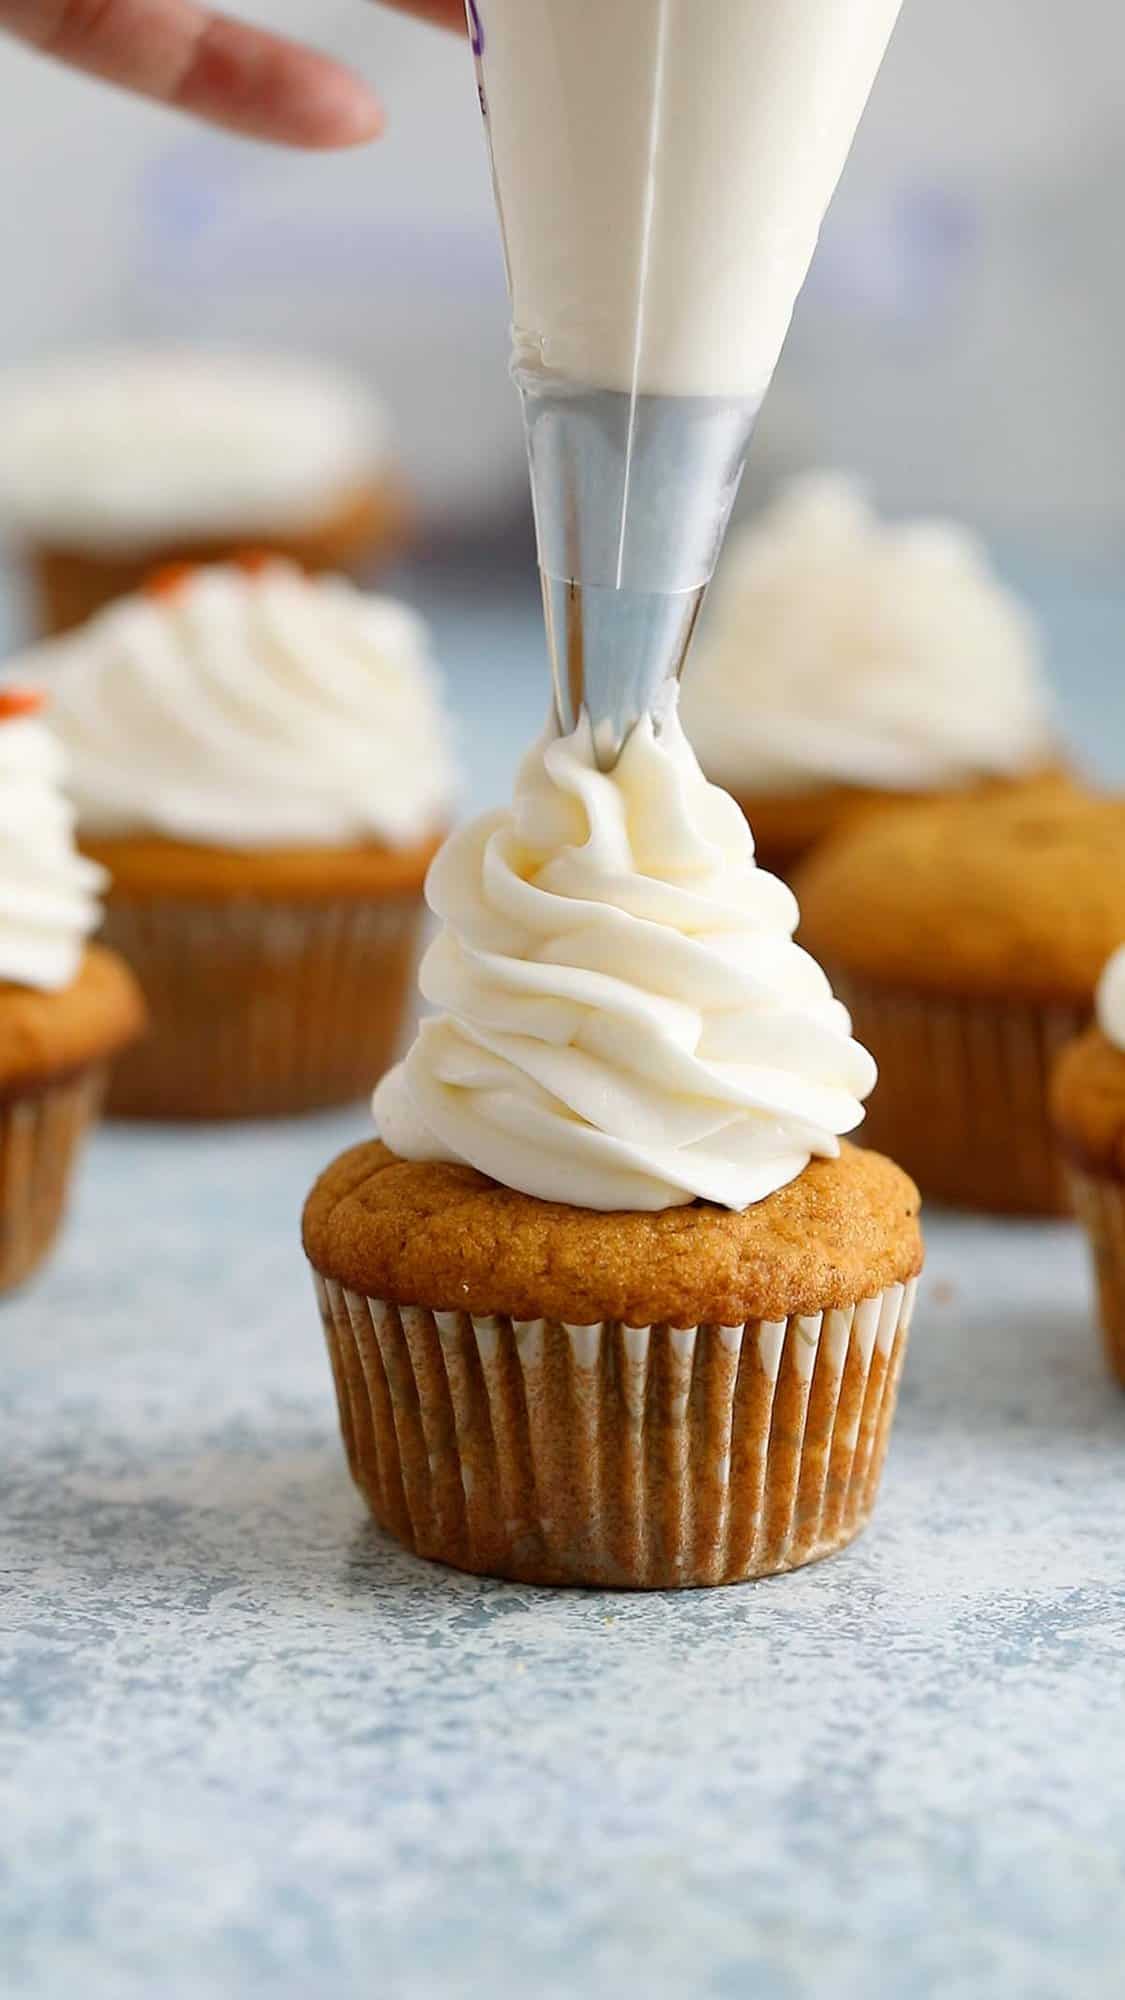 frosting being piped on a pumpkin cupcake using piping bag.